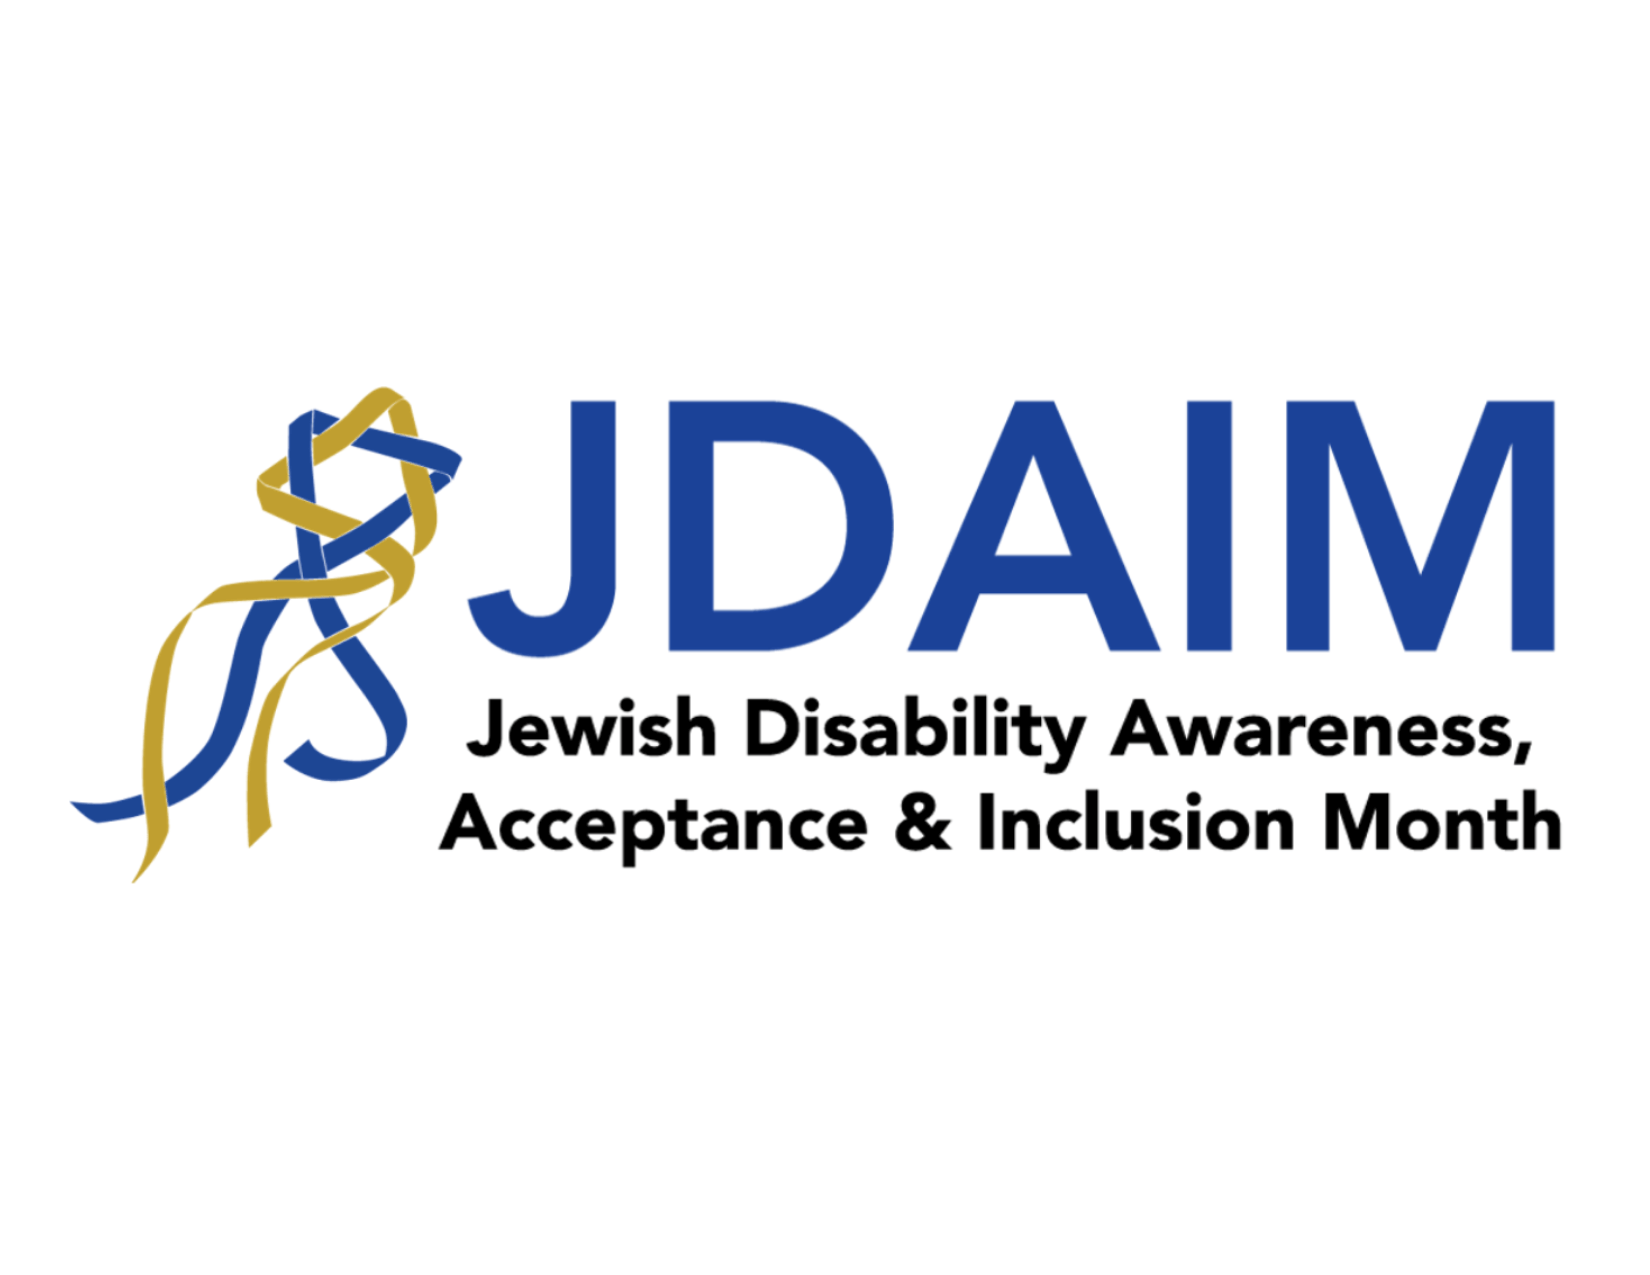 February is Jewish Disability Awareness, Acceptance and Inclusion Month